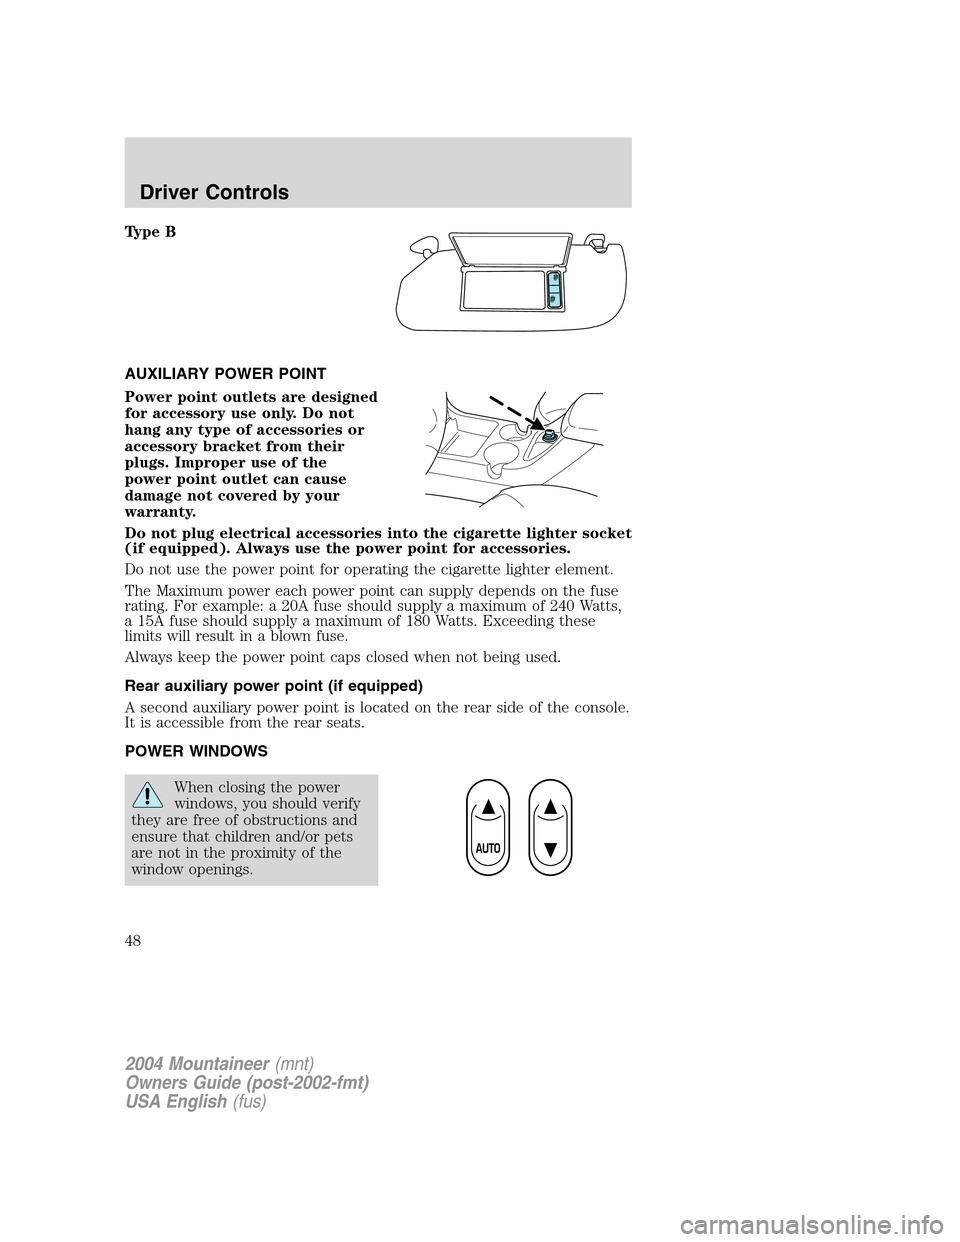 Mercury Mountaineer 2004  s Service Manual Type B
AUXILIARY POWER POINT
Power point outlets are designed
for accessory use only. Do not
hang any type of accessories or
accessory bracket from their
plugs. Improper use of the
power point outlet 